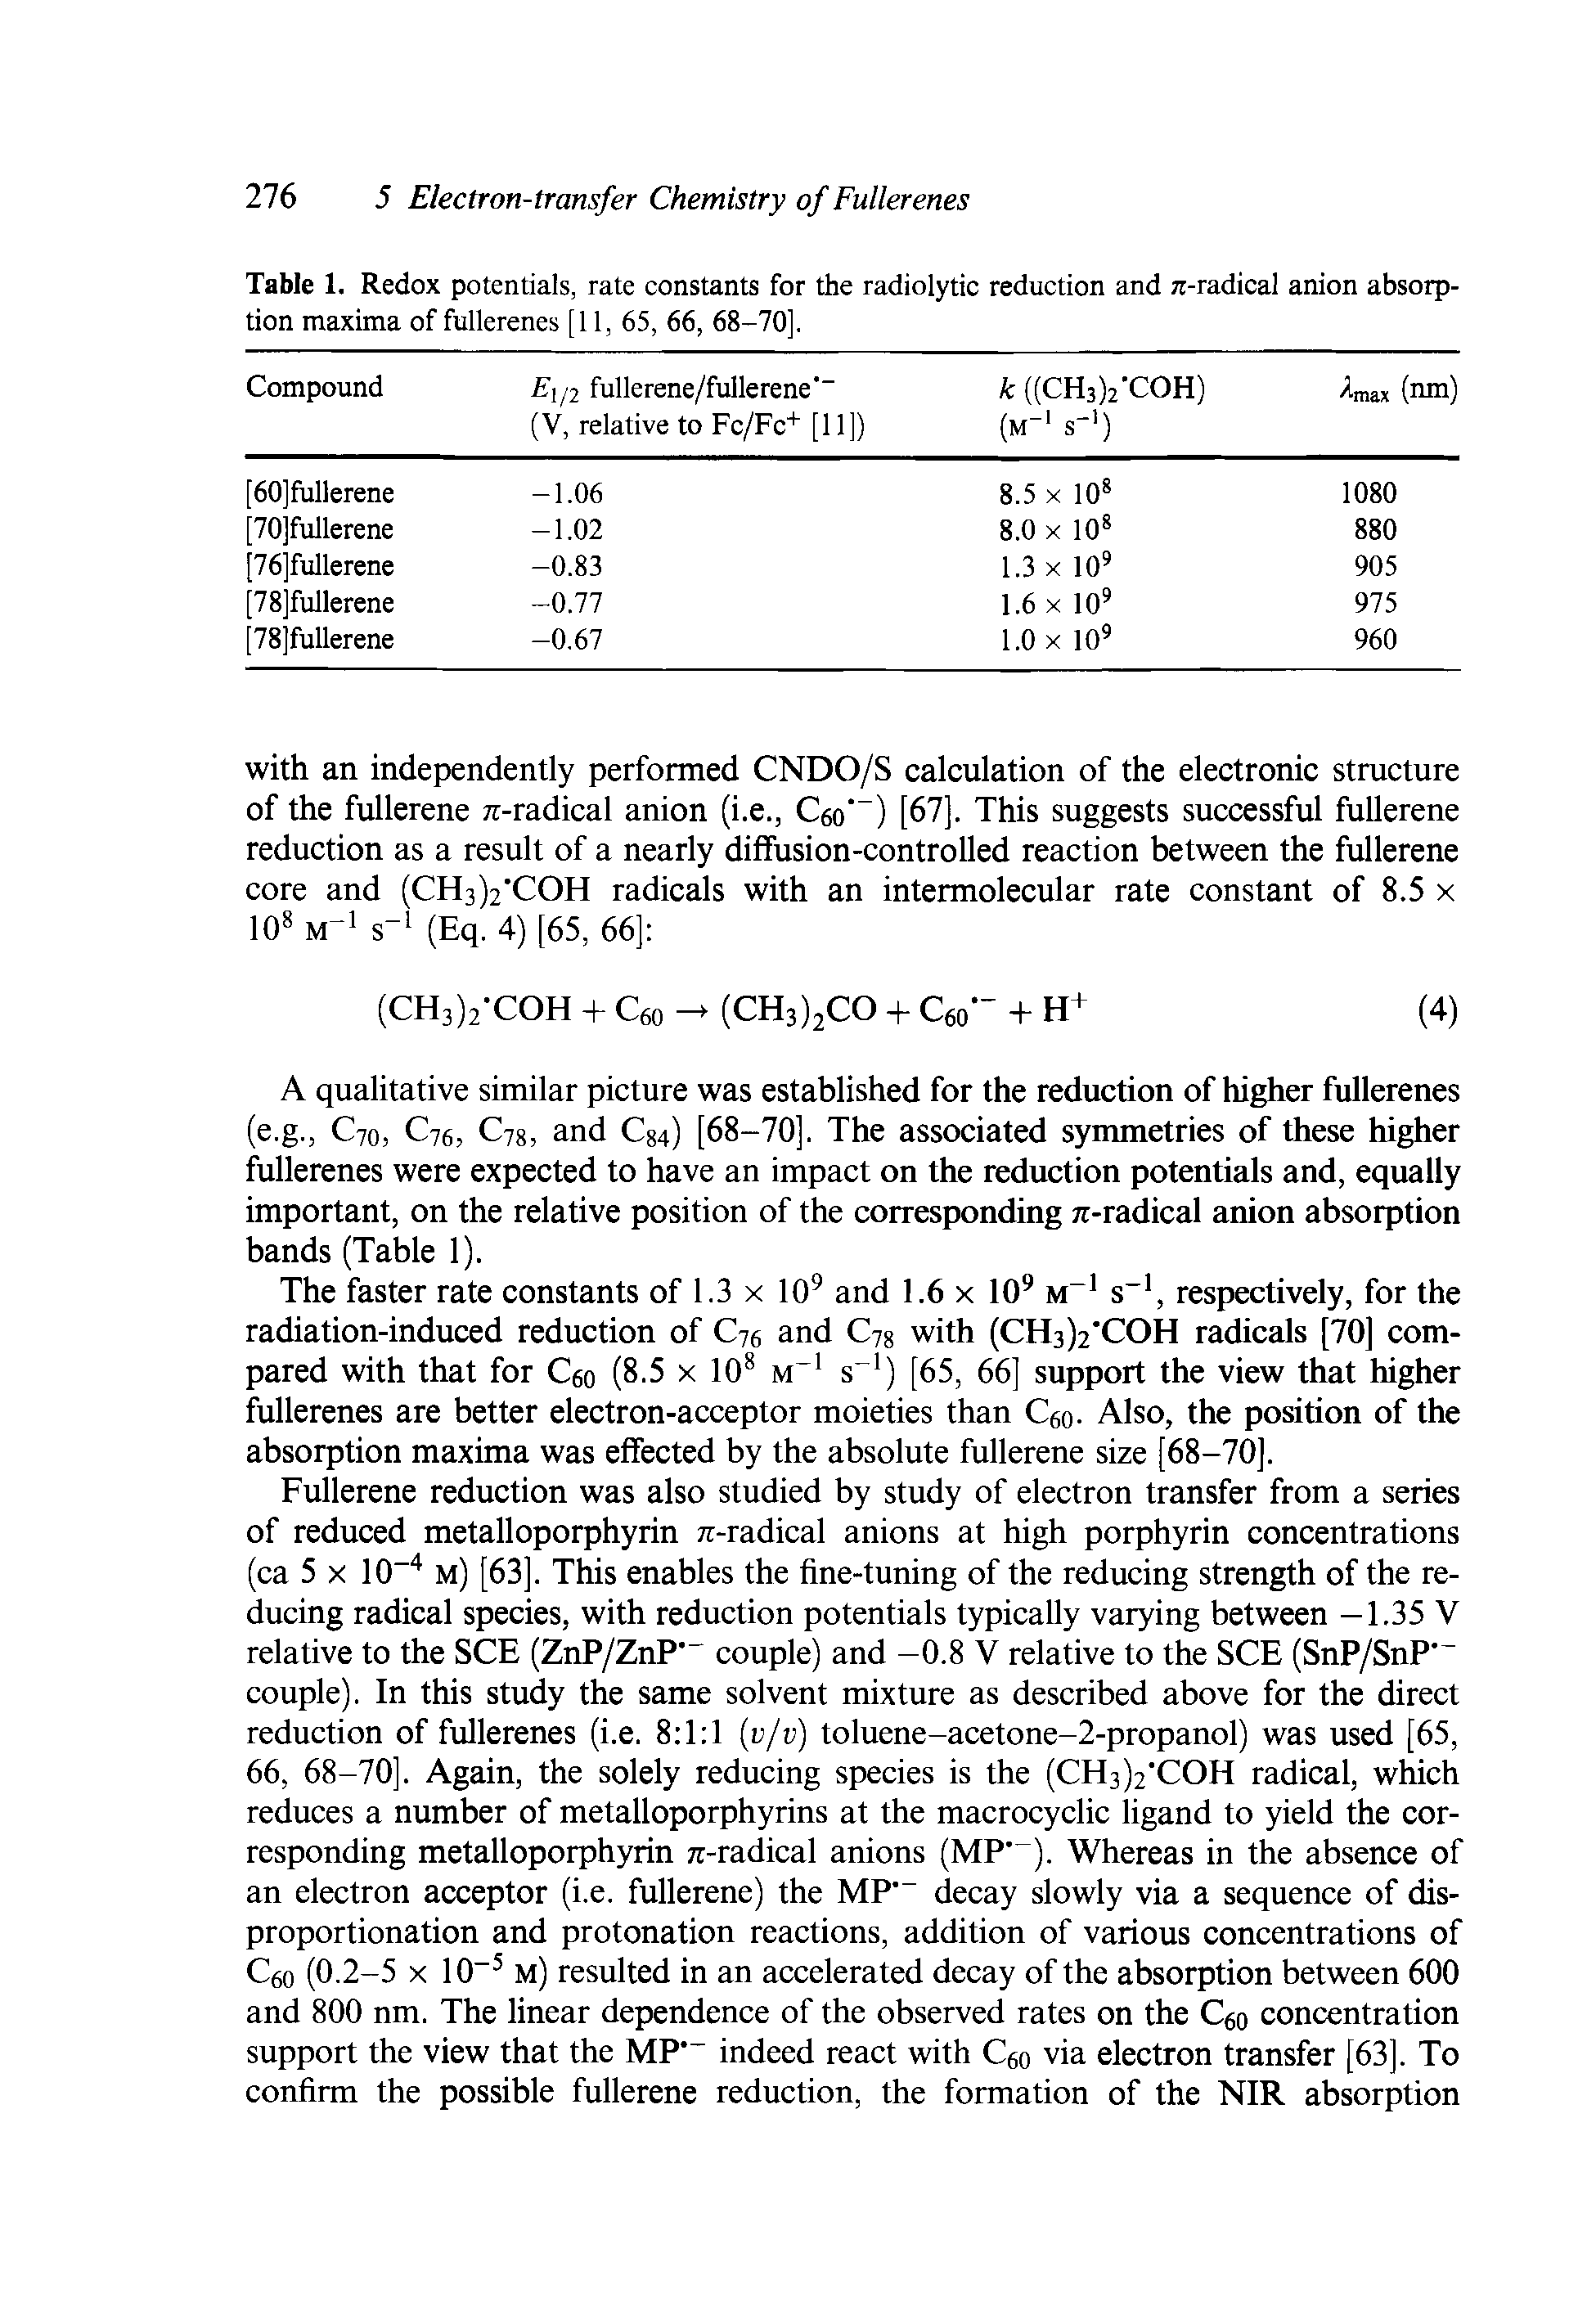 Table 1. Redox potentials, rate constants for the radiolytic reduction and r-radical anion absorption maxima of fullerenes [11, 65, 66, 68-70],...